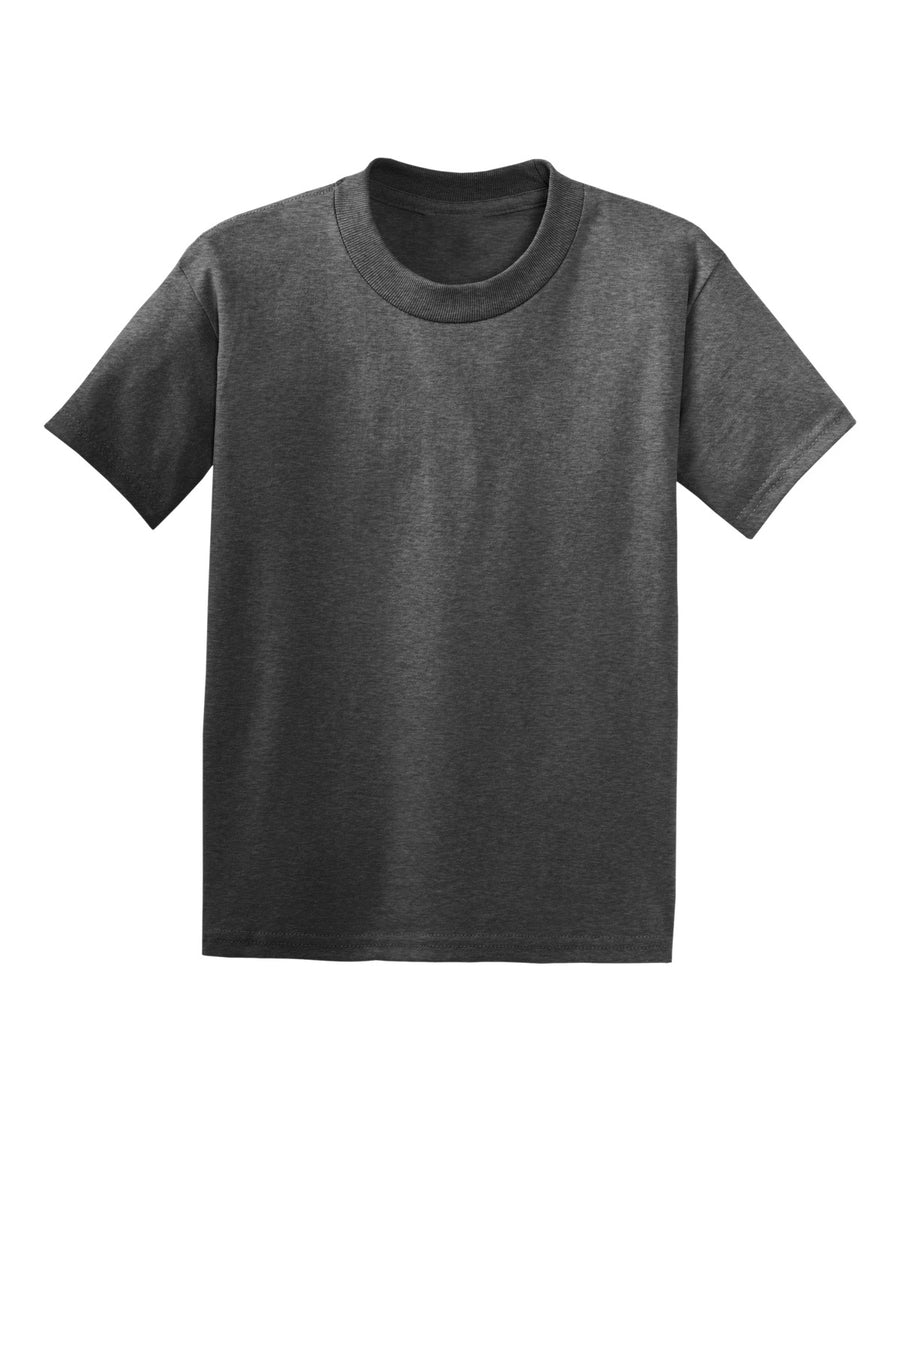 5370-Charcoal Heather-front_model